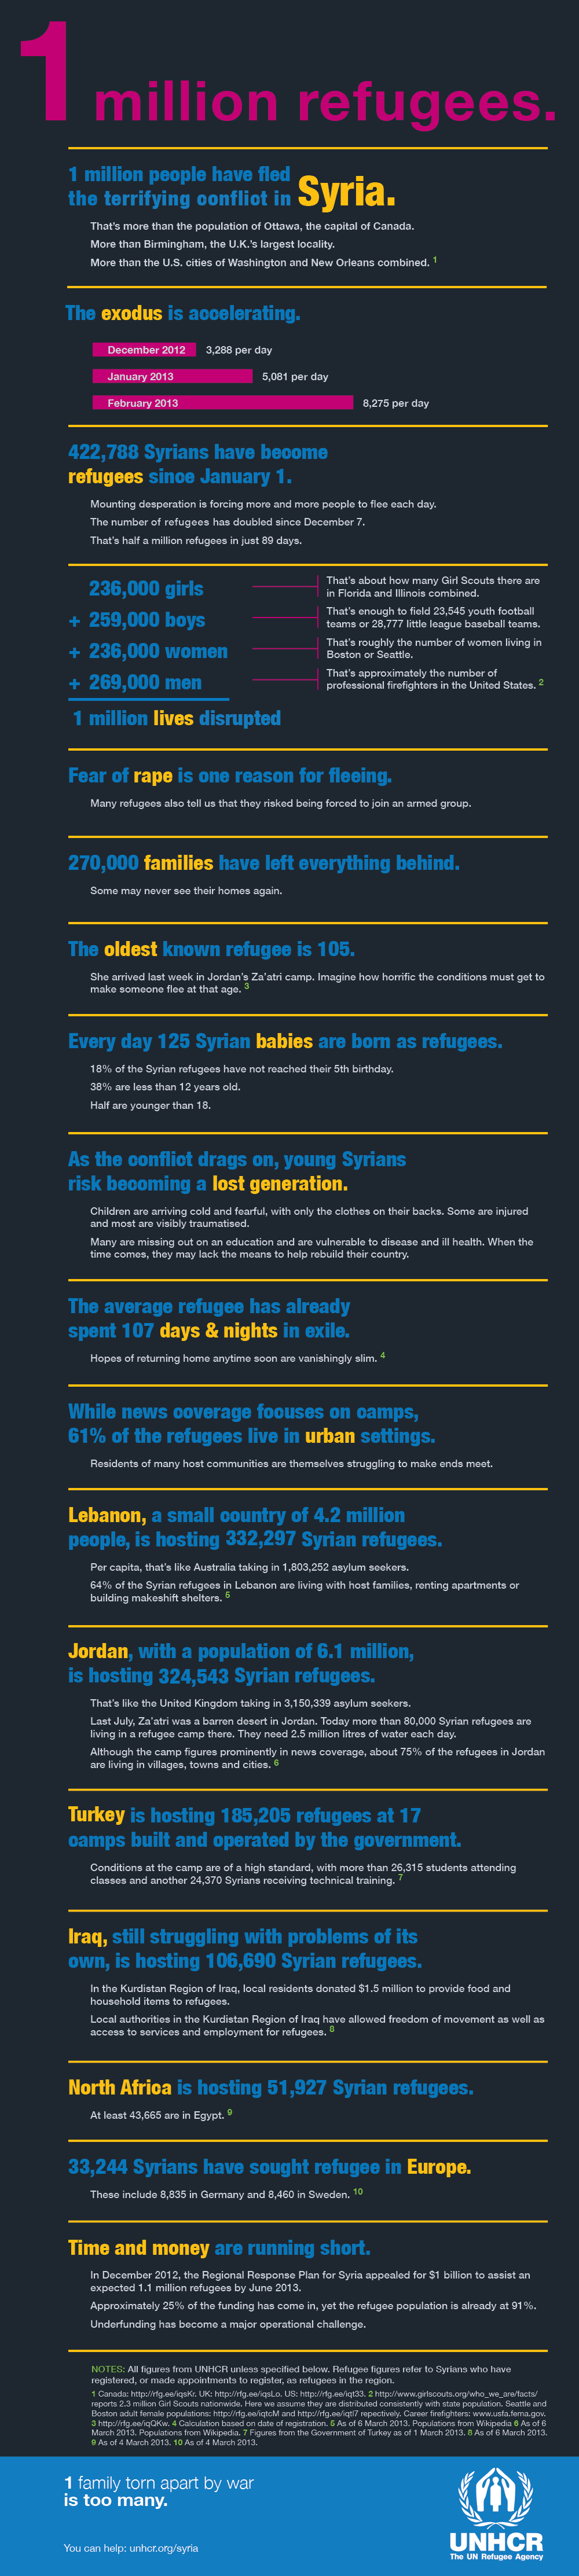 An information graphic created to depict the vast amount of Syrians that have fled. This was created when about 1 million had fled in total.